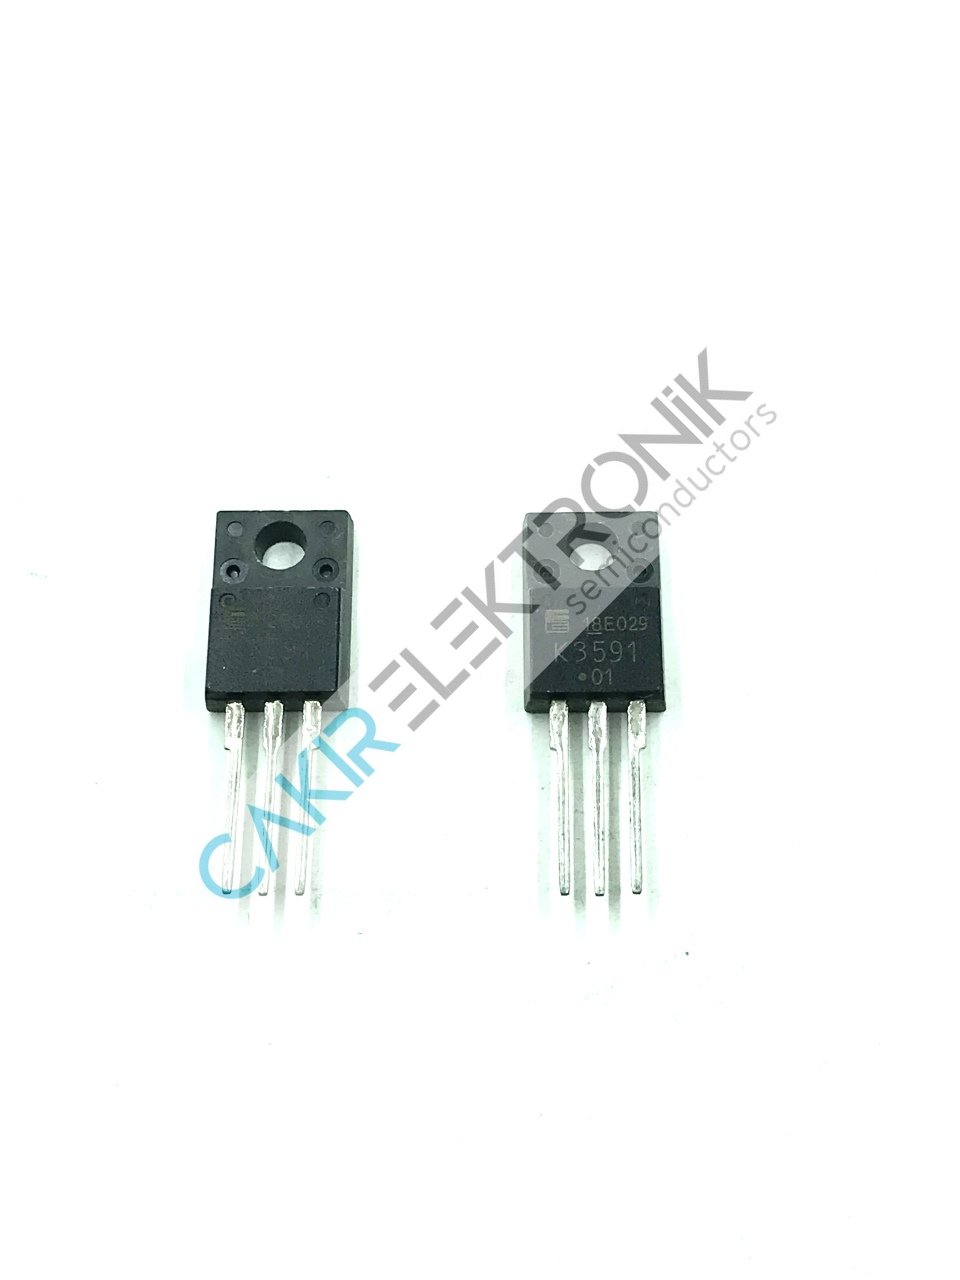 2SK3591 - K3591 - 57A. 150V. N-CHANNEL SILICON POWER MOSFET